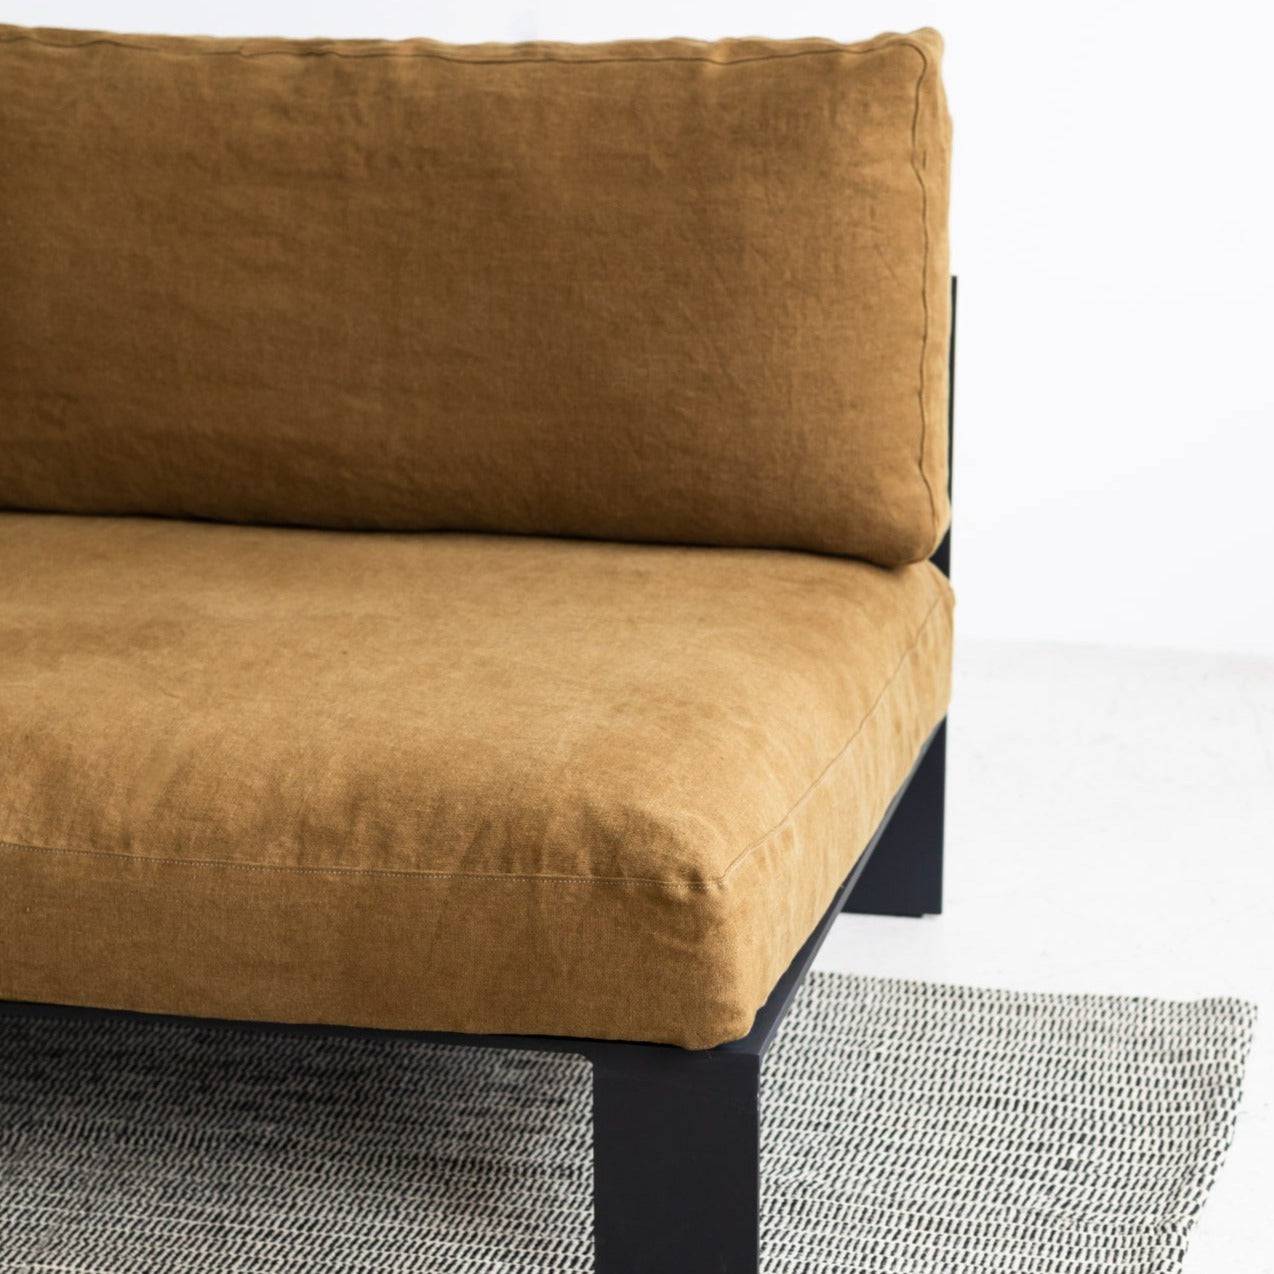 Mombaers Lounge Chair - Mustard - THAT COOL LIVING